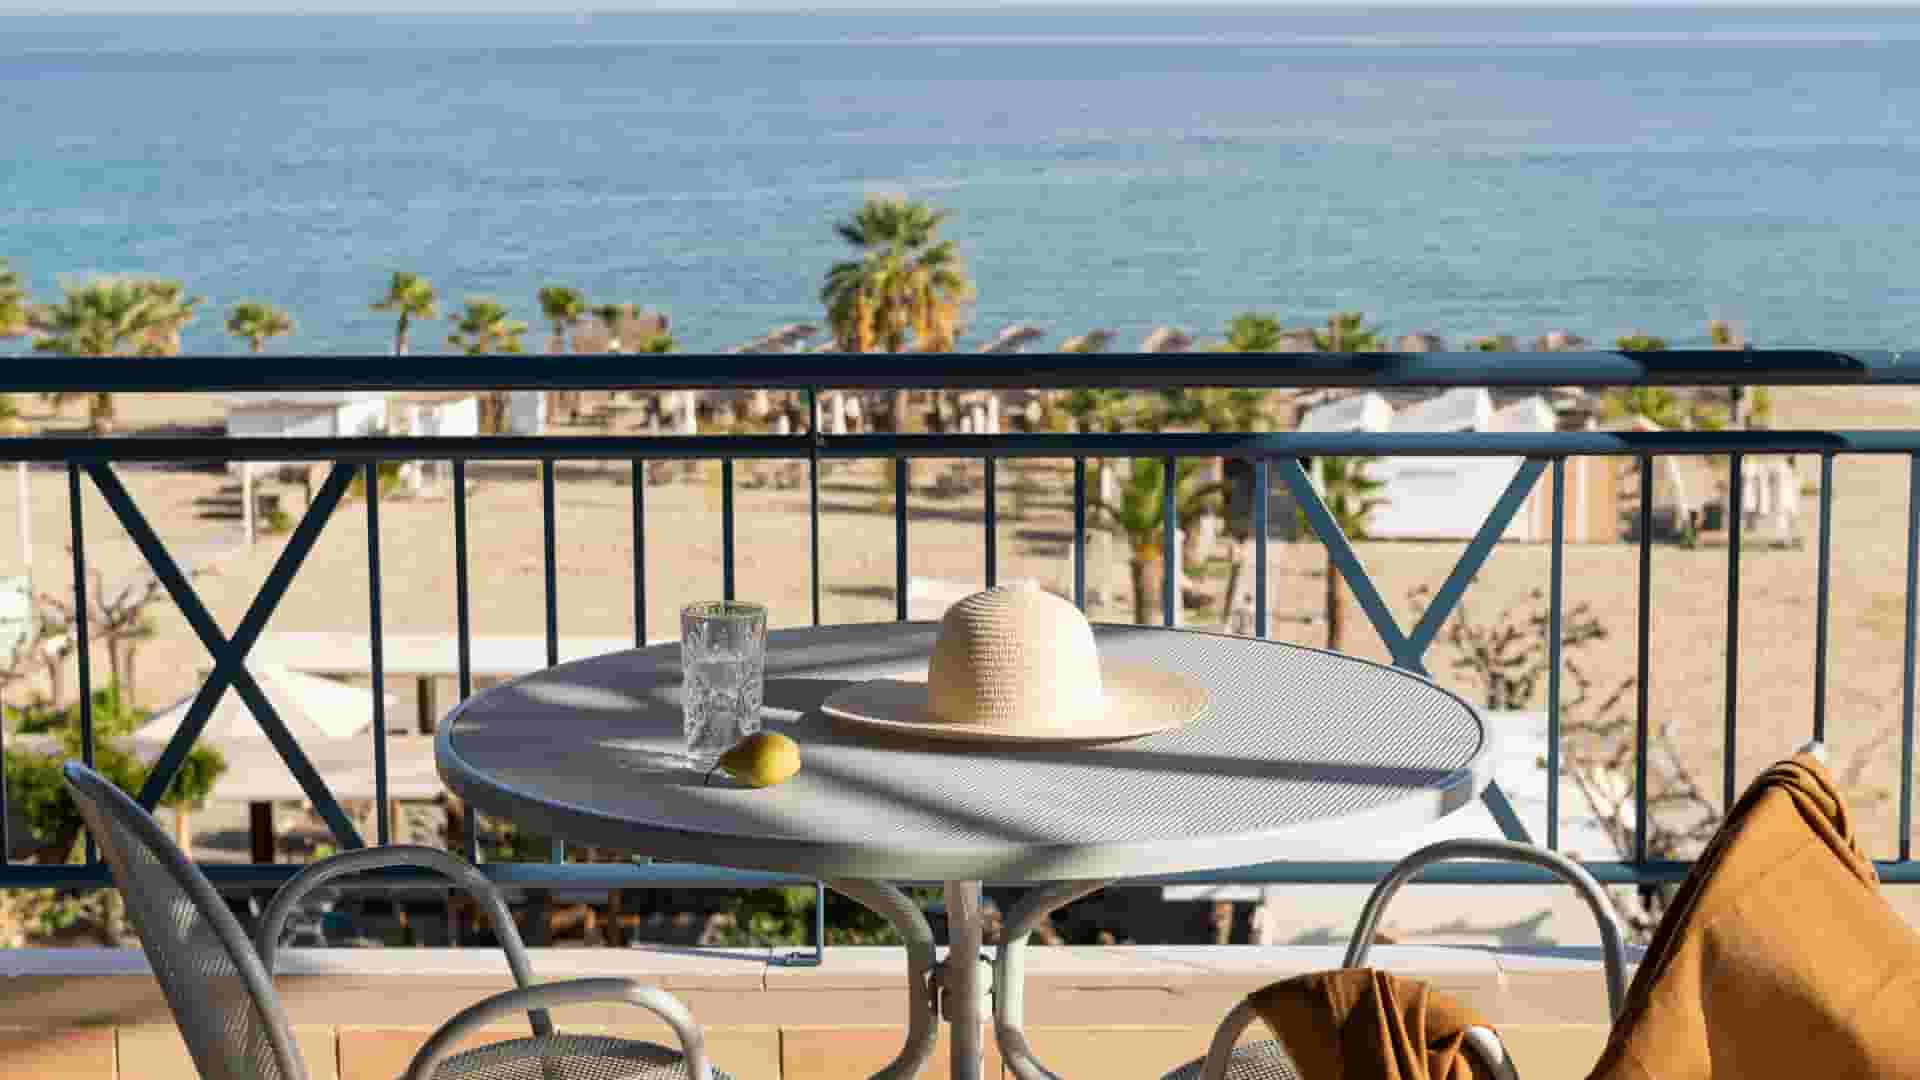 a table with a hat and chairs by a body of water